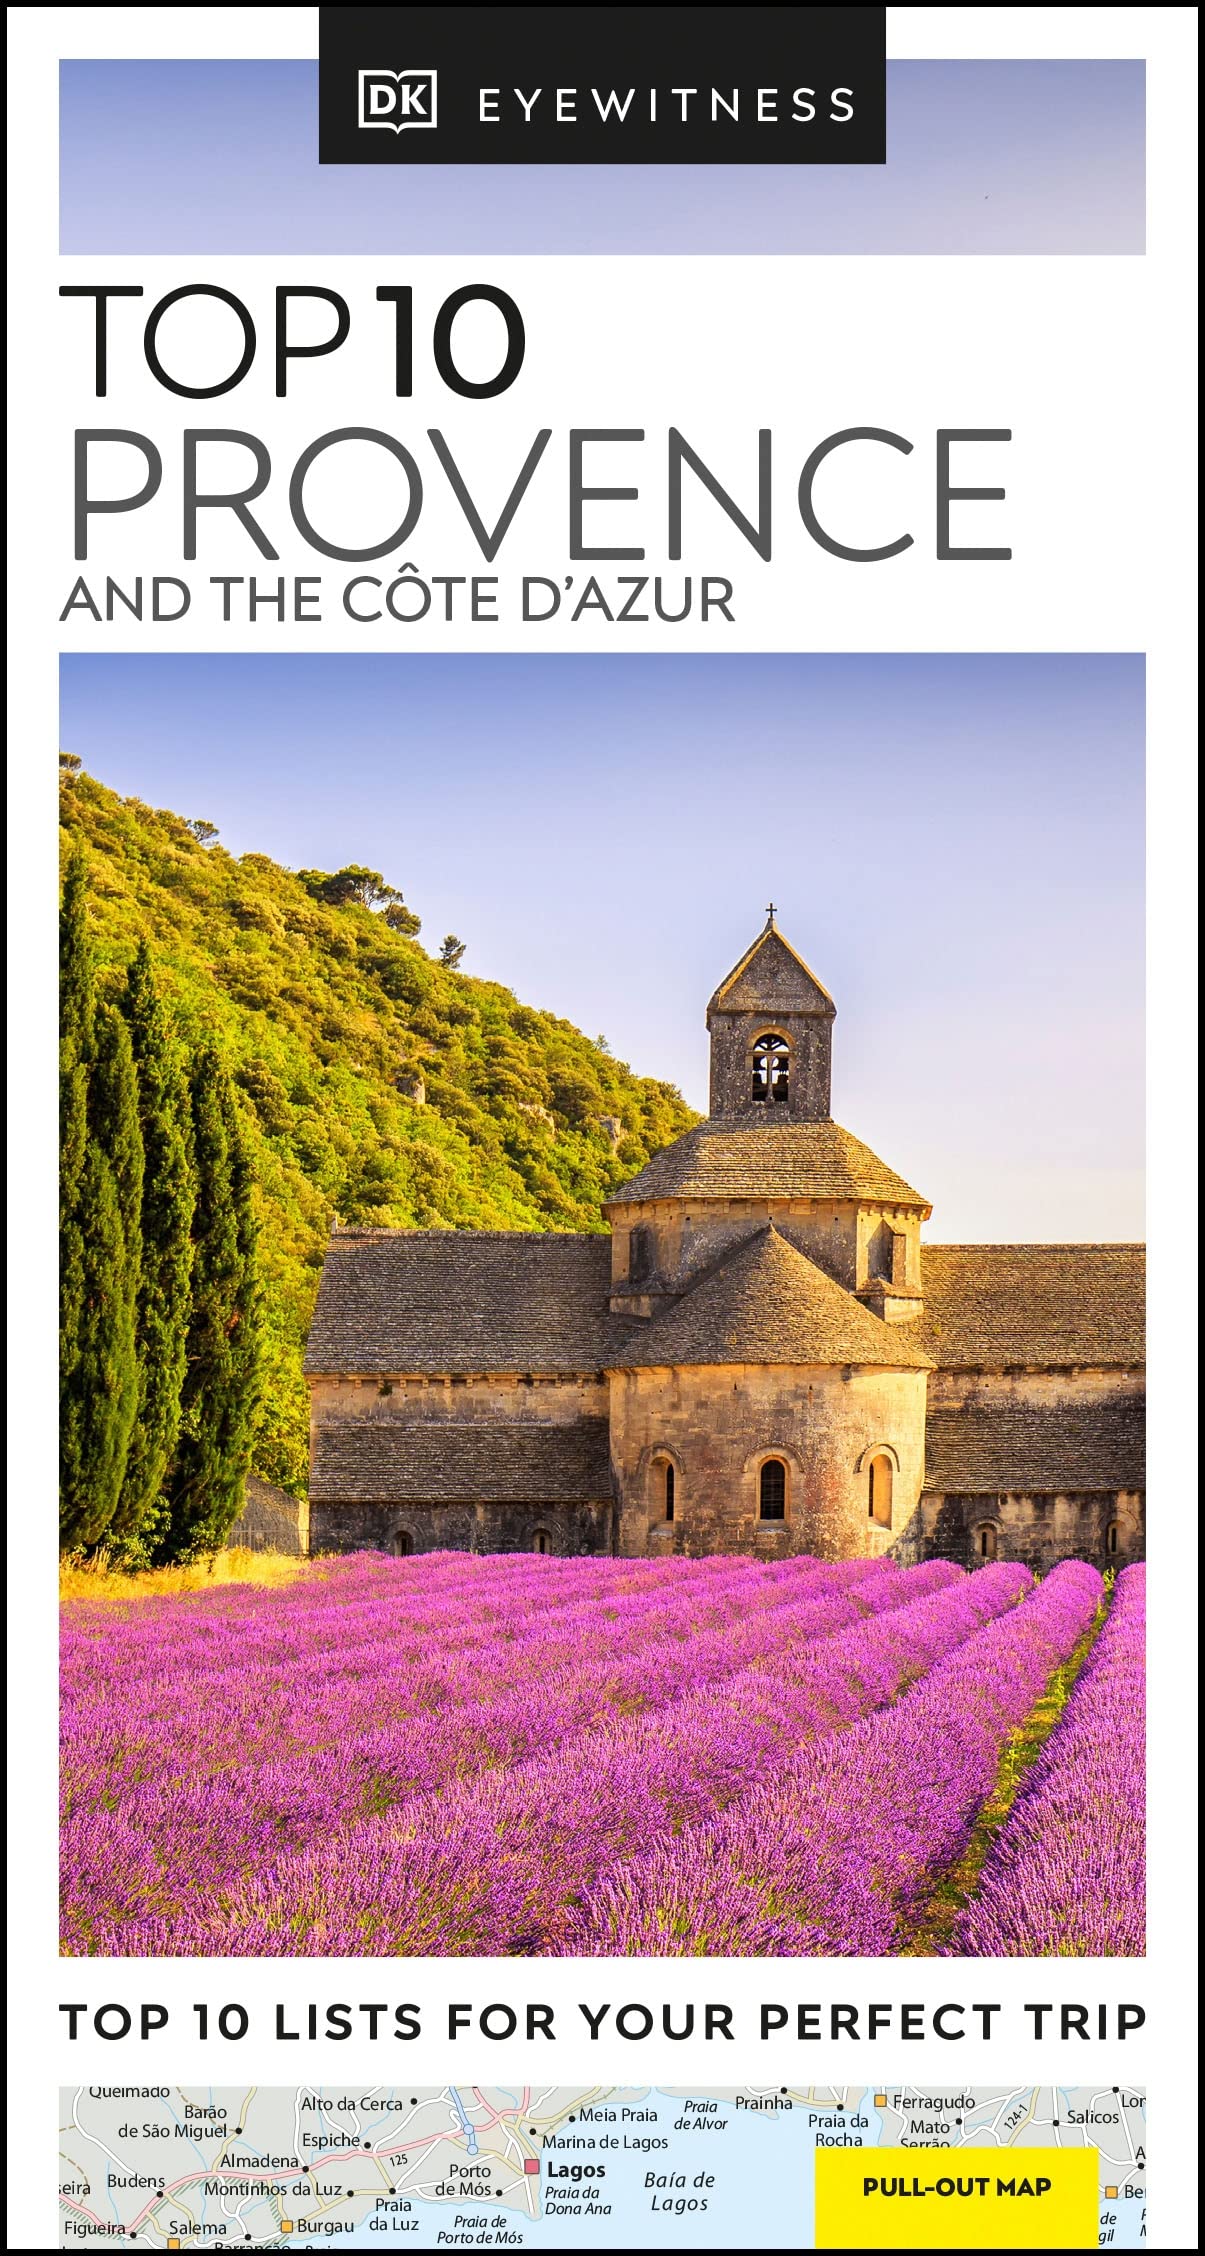 Provence and the Côte d'Azur